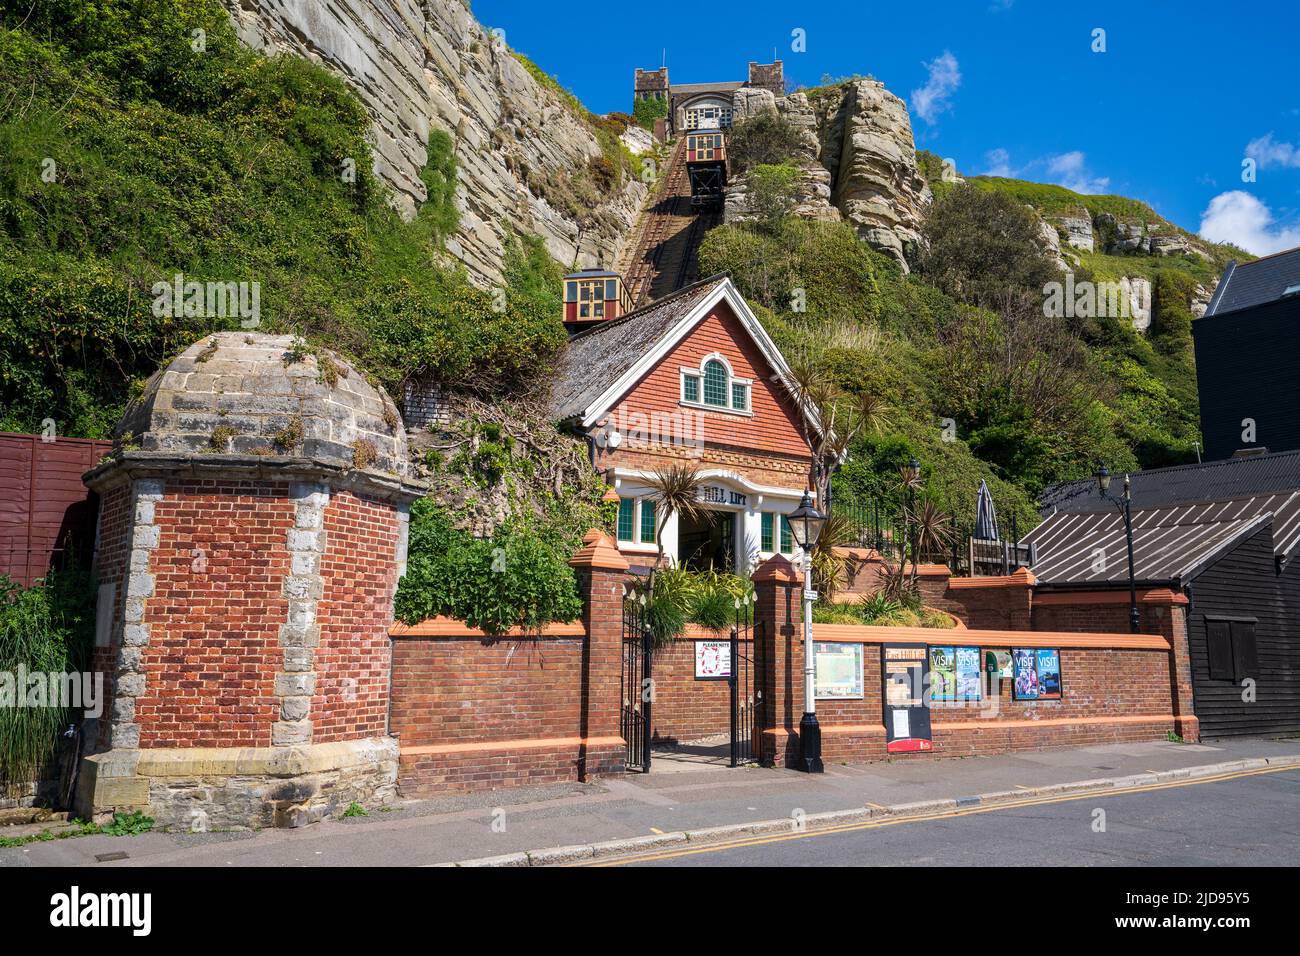 The West Hill Cliff Railway, or West Hill Lift, is a funicular railway located in the English seaside town of Hastings, East Sussex, England, Uk Stock Photo